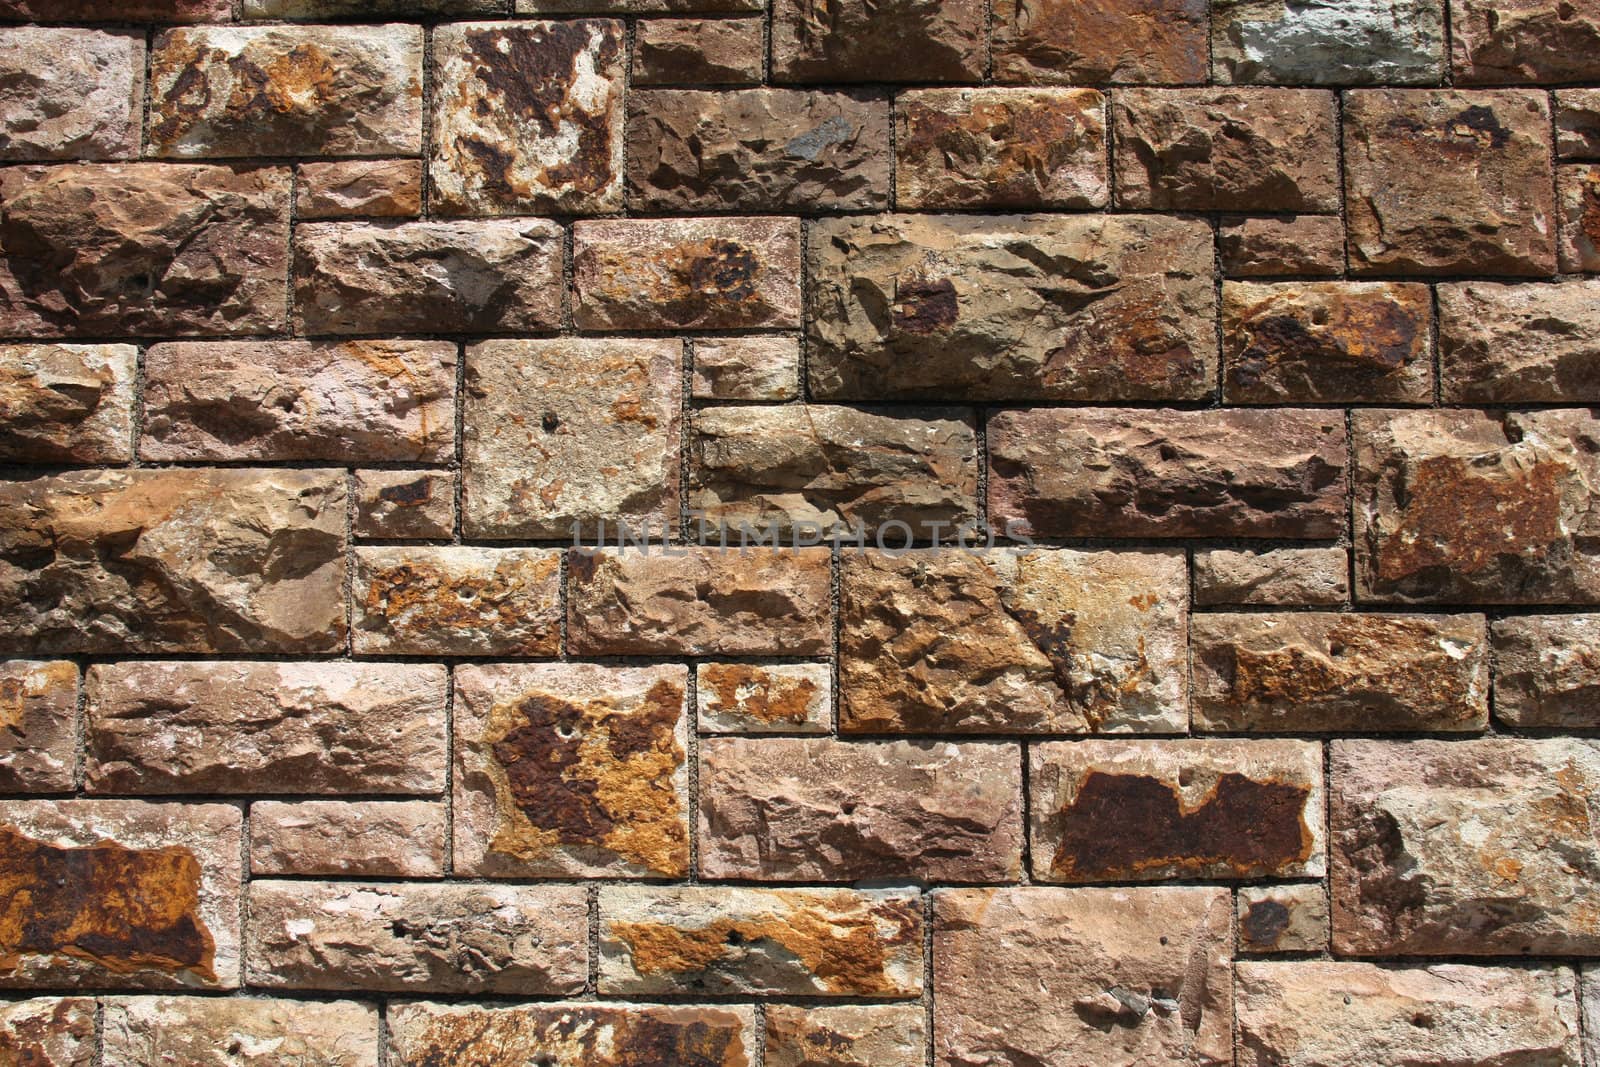 Stone wall background texture. Abstract pattern photo.